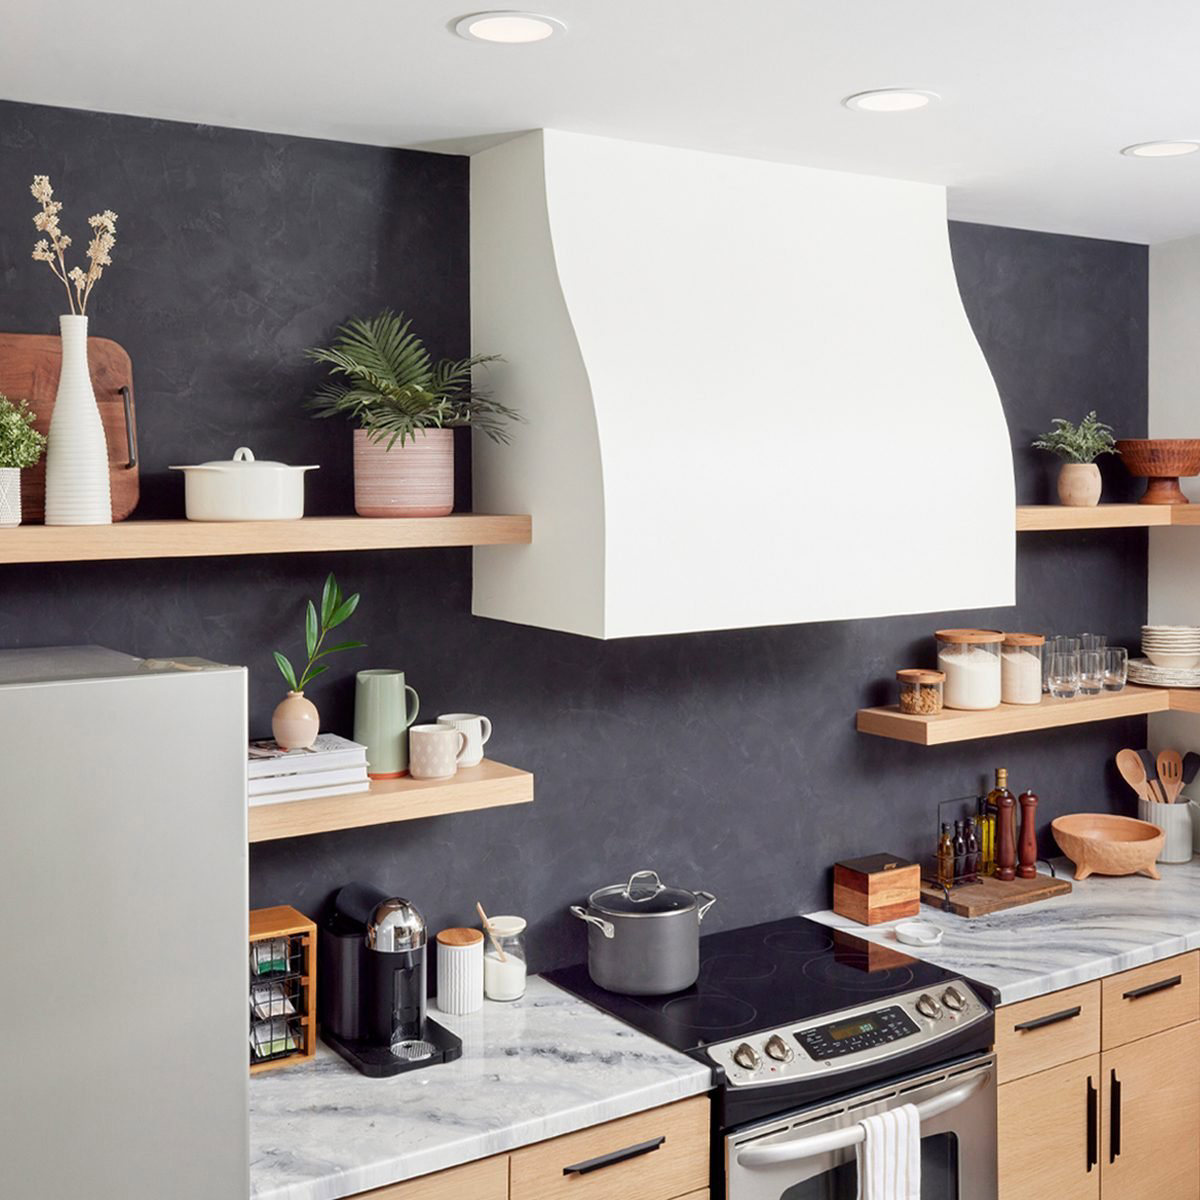 How to Install a Ready-to-Assemble Range Hood